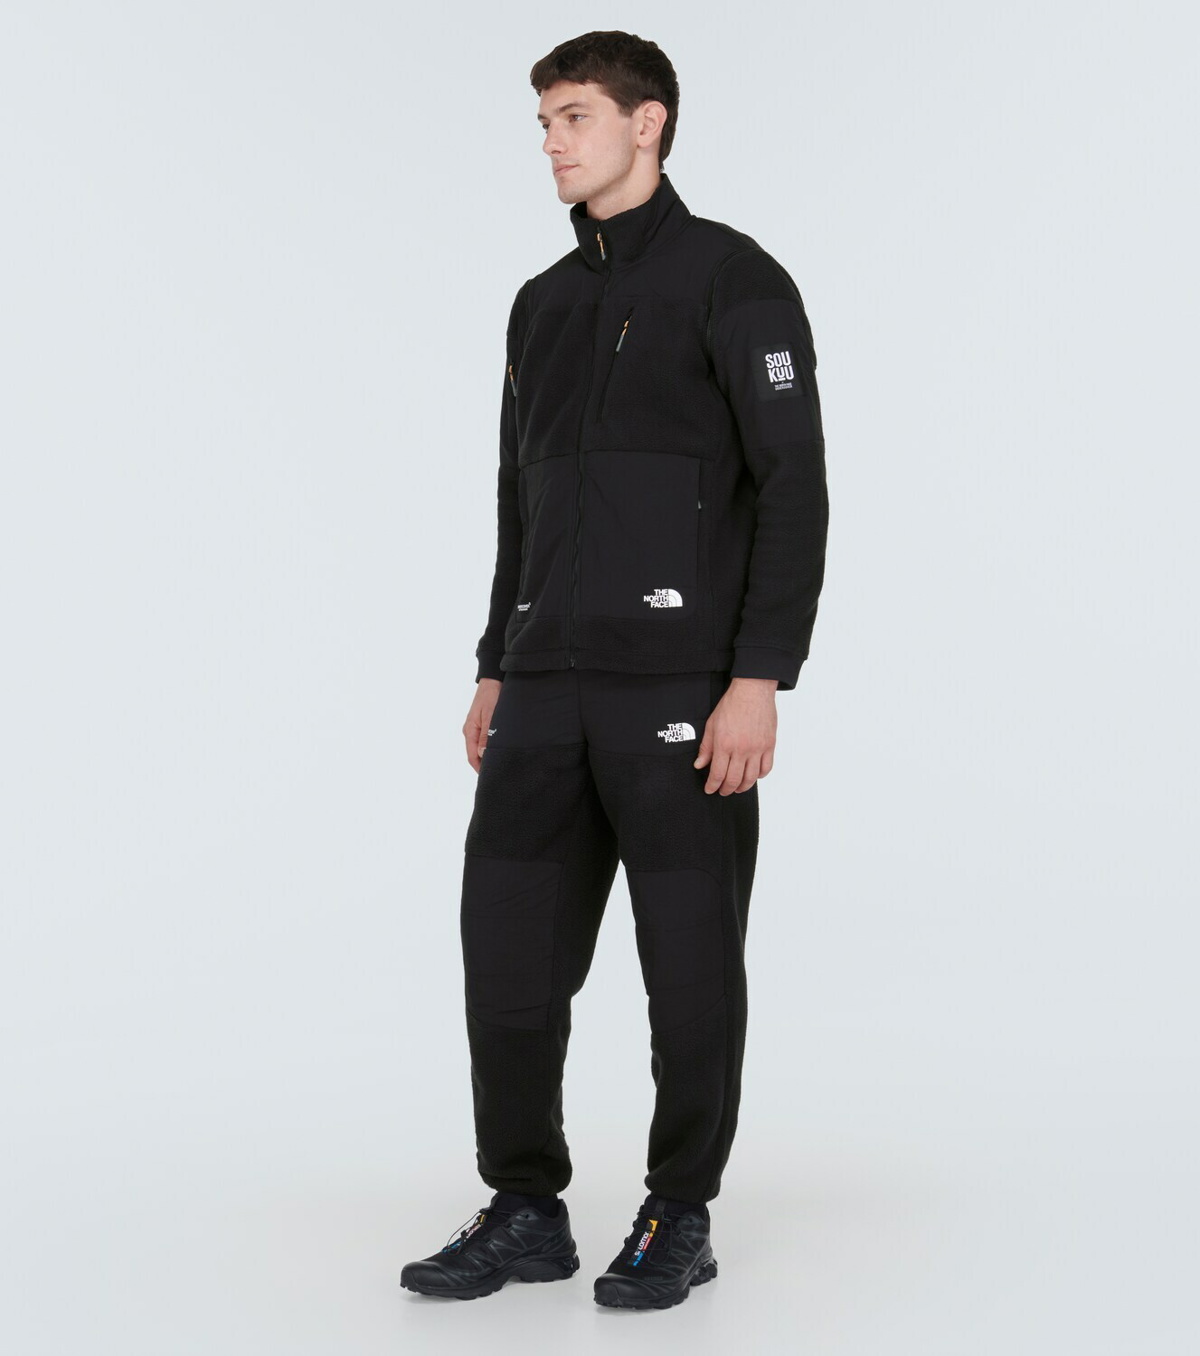 The North Face x Undercover Soukuu fleece jacket The North Face